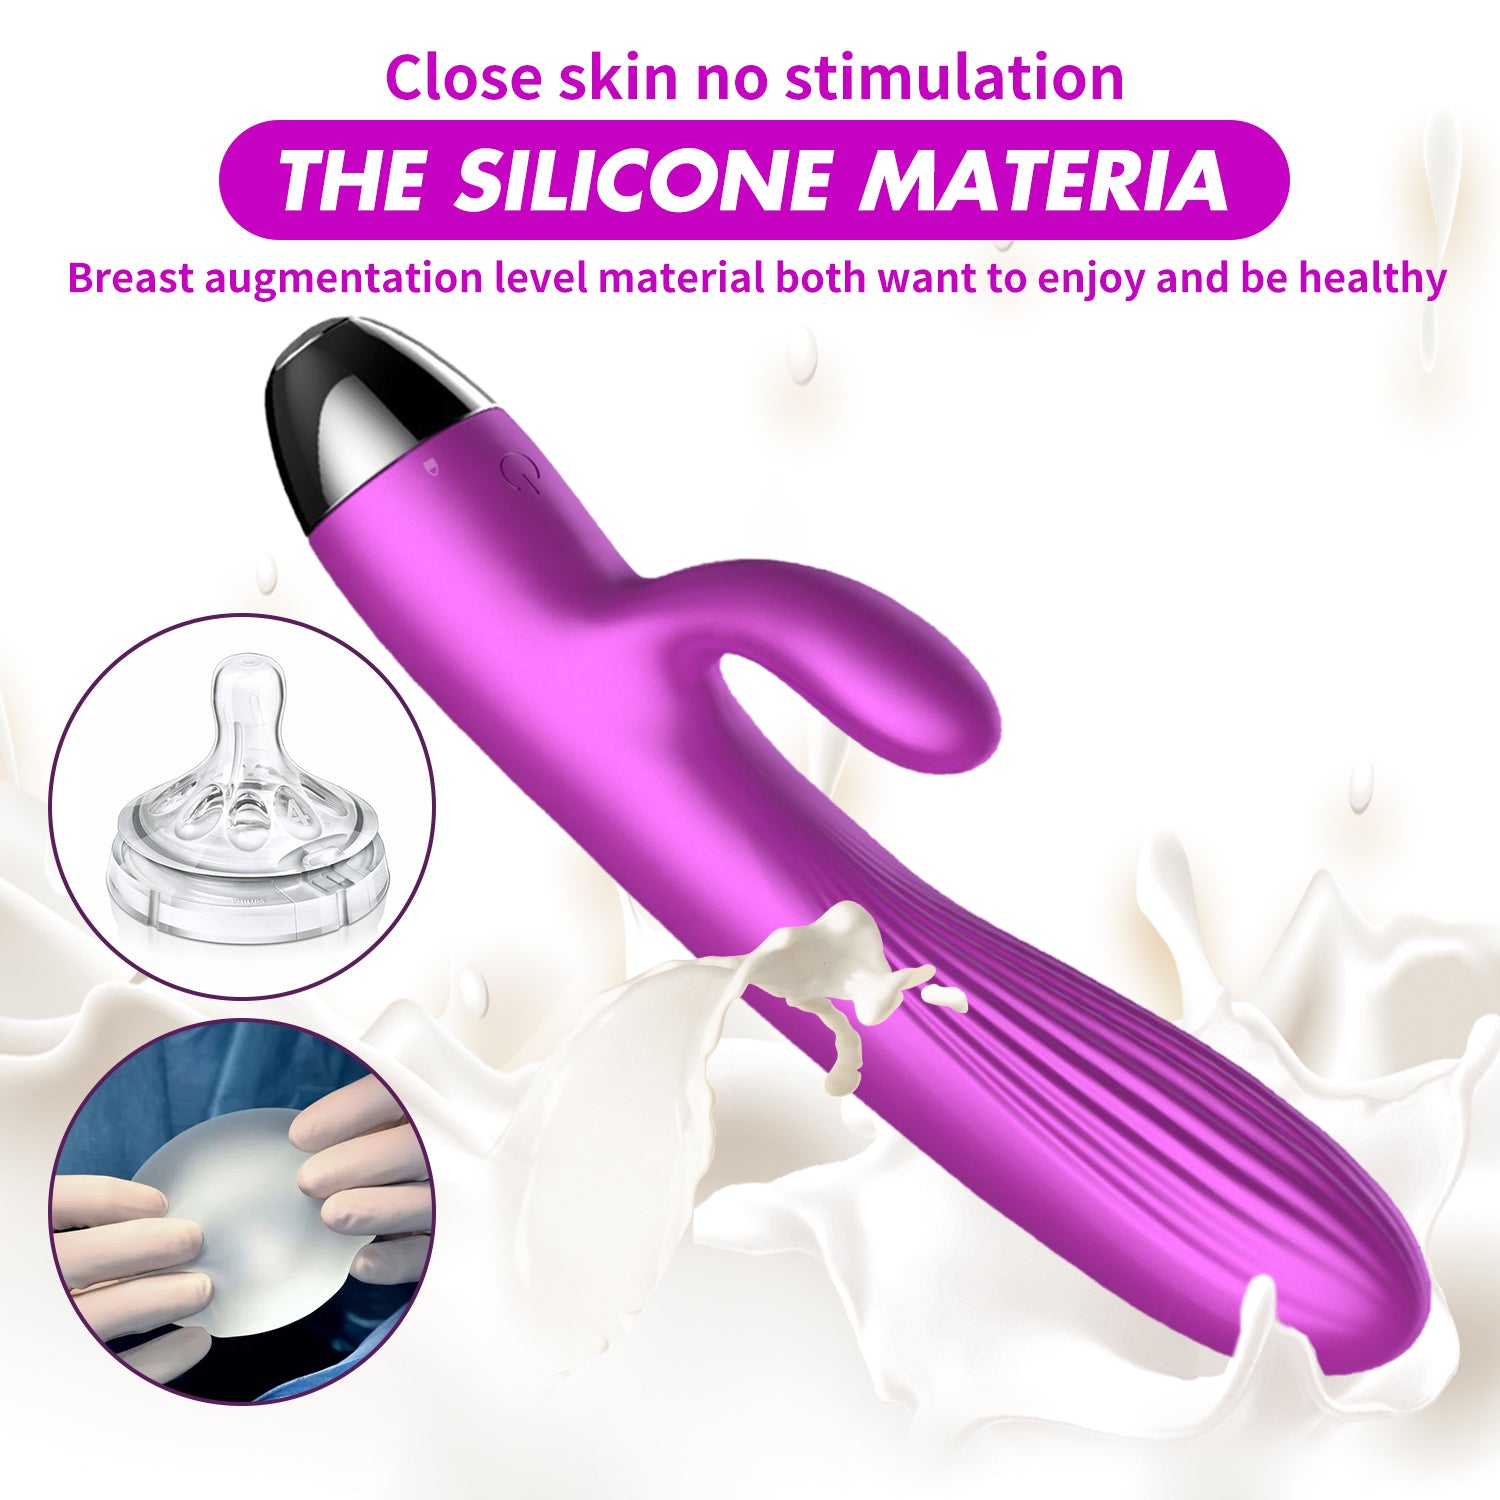 2 In 1 Dildos Vibrator Safety Material